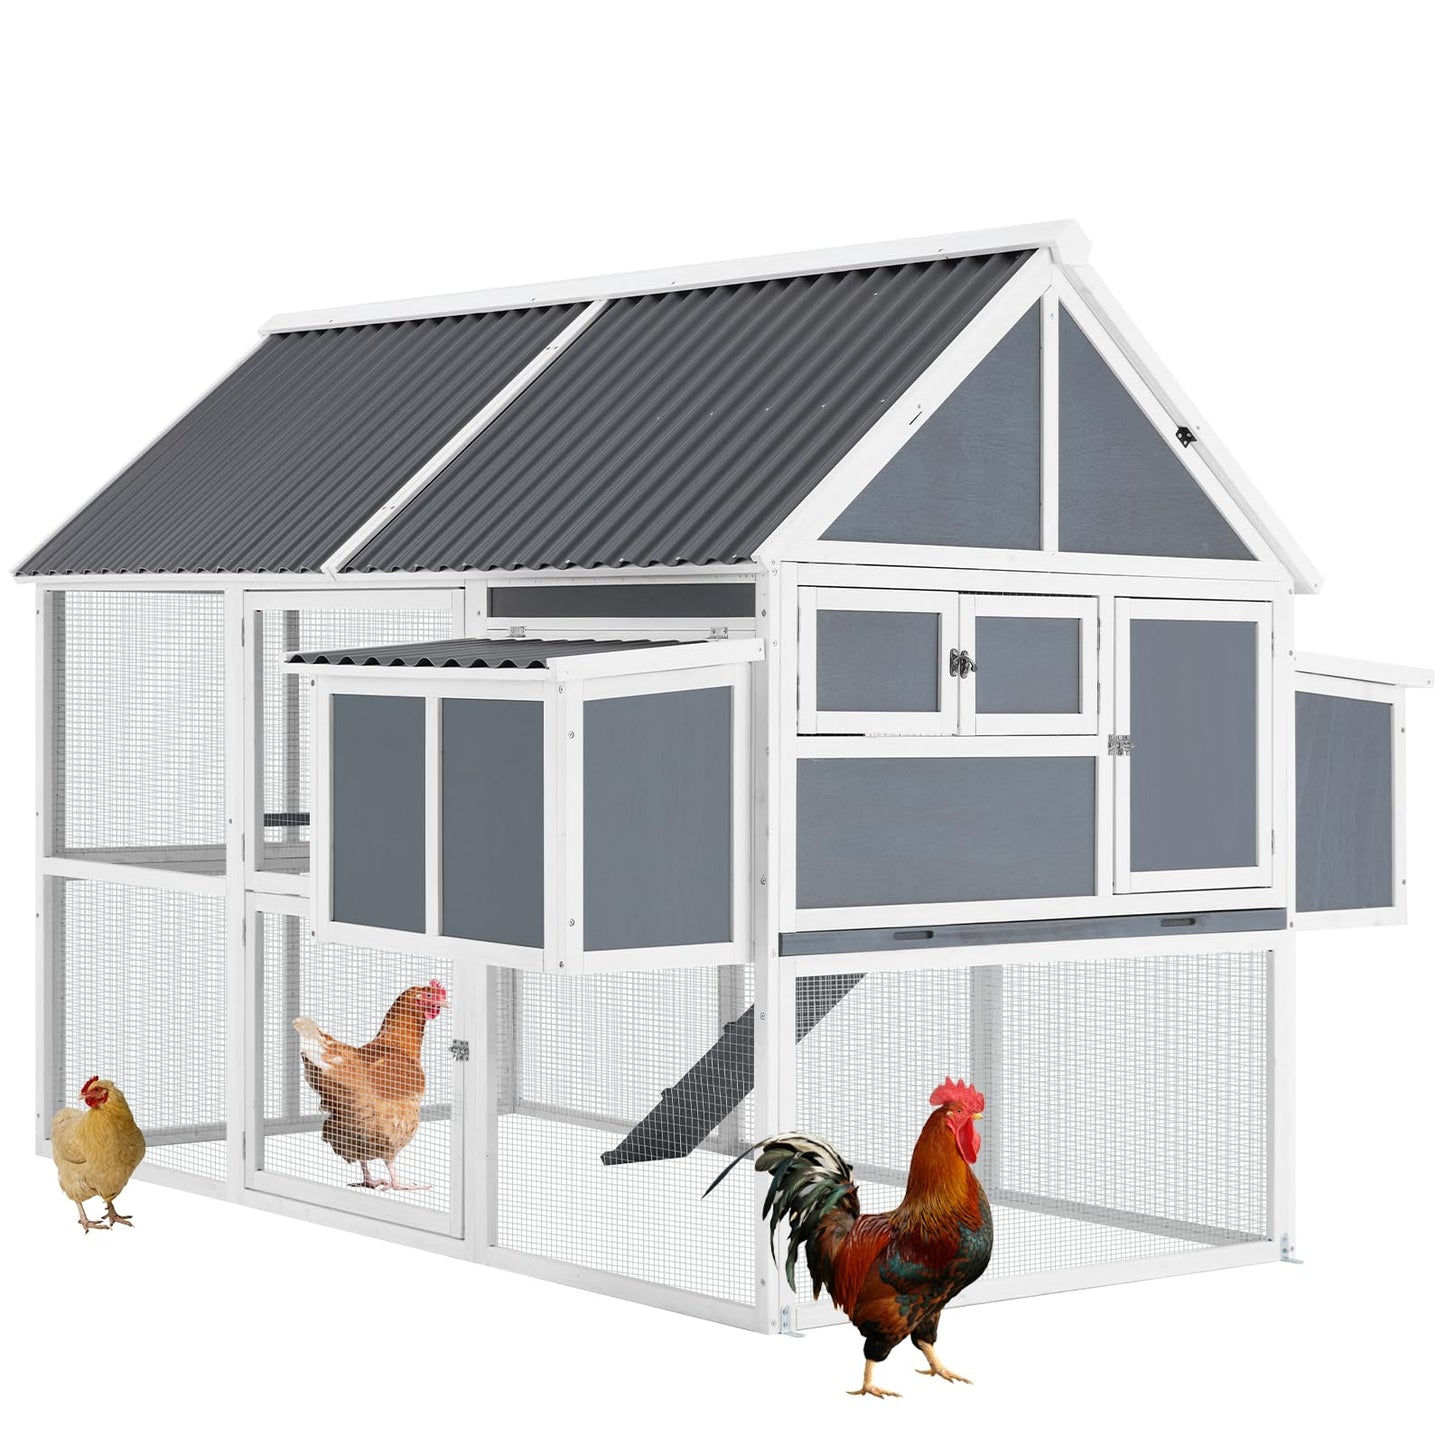 AECOJOY 84” Large Chicken Coop, Outdoor Wooden Hen House Poultry Cage Multi-Level Hutch w/ 2 Nesting Boxes, Ramps, Run, Wire Fence, Removable Tray for Easy Cleaning